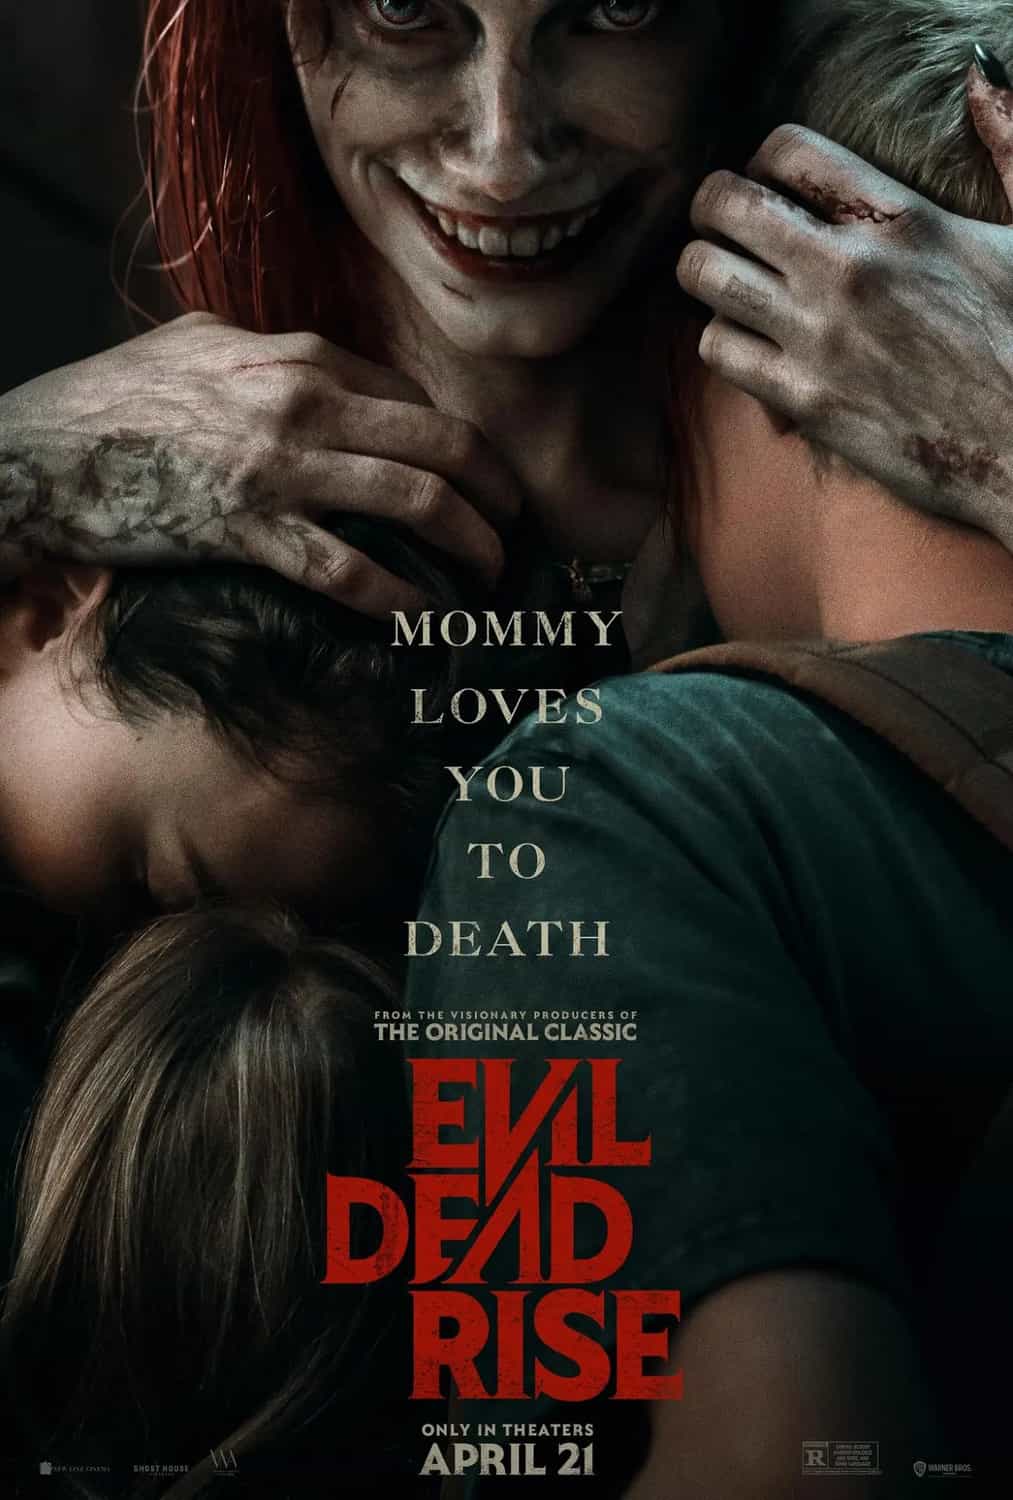 Evil Dead Rise is given an 18 age rating in the UK for strong bloody violence, gore